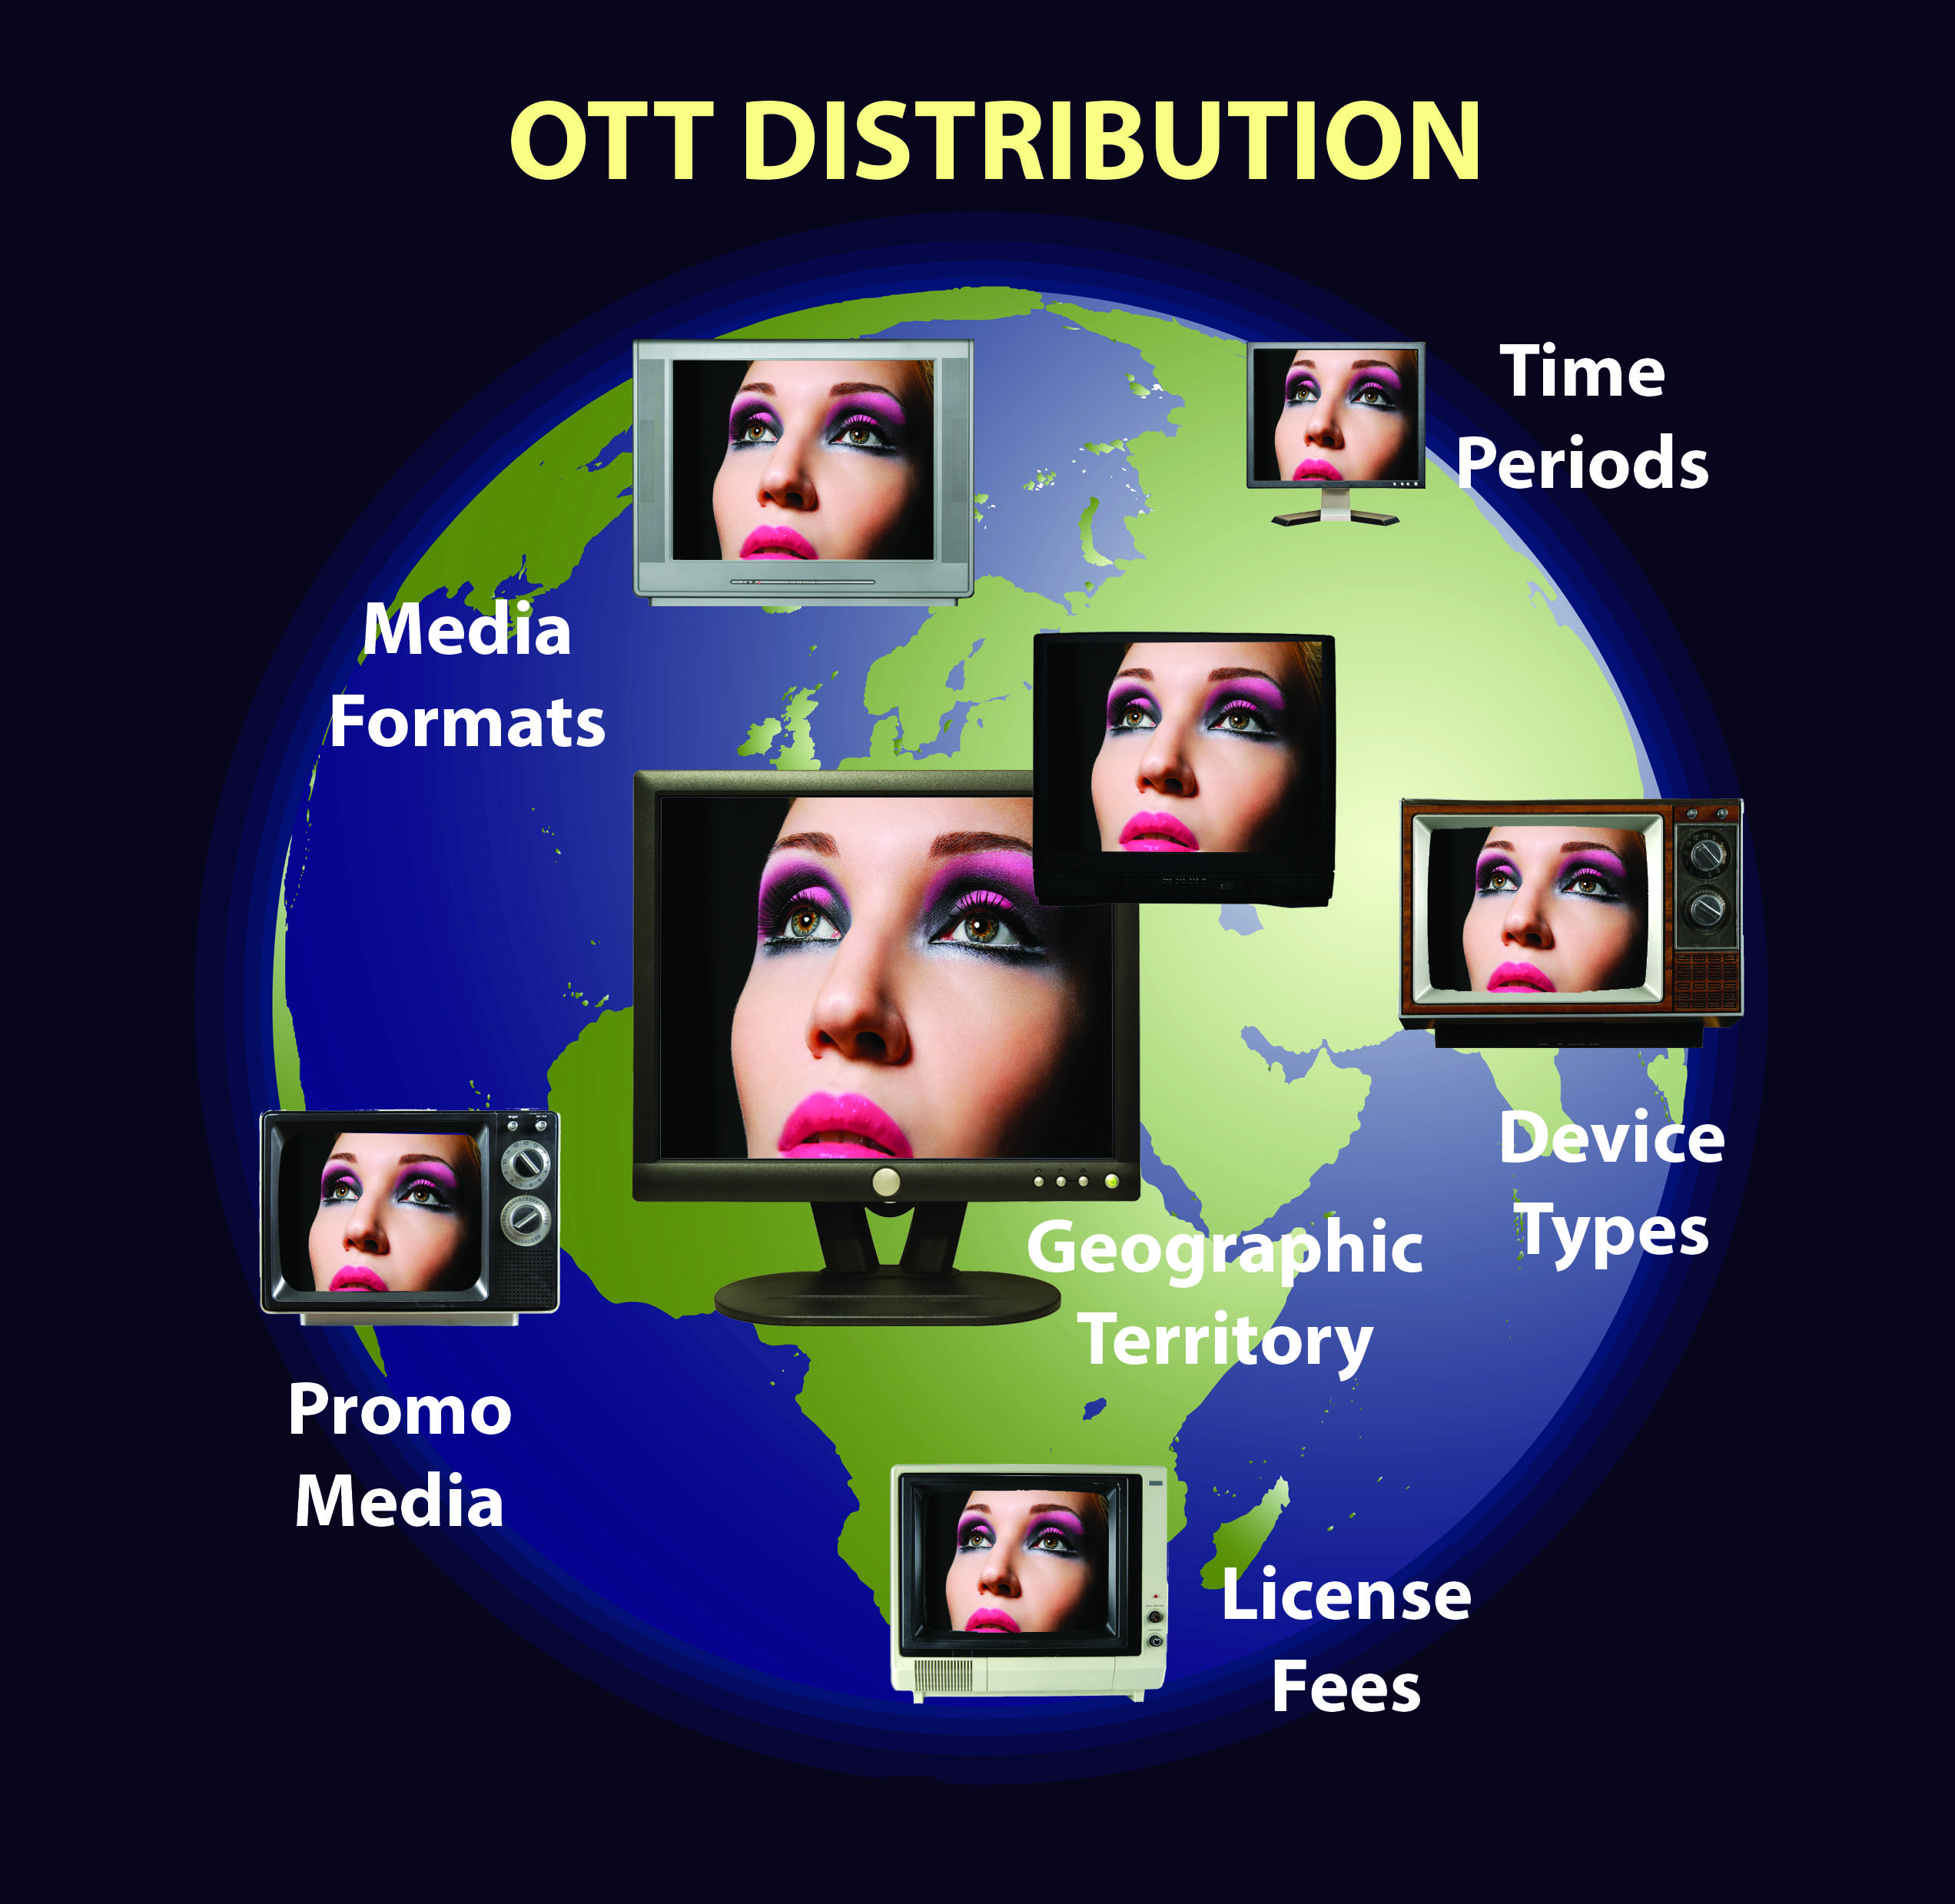 OTT Global Content Distribution and Licensing